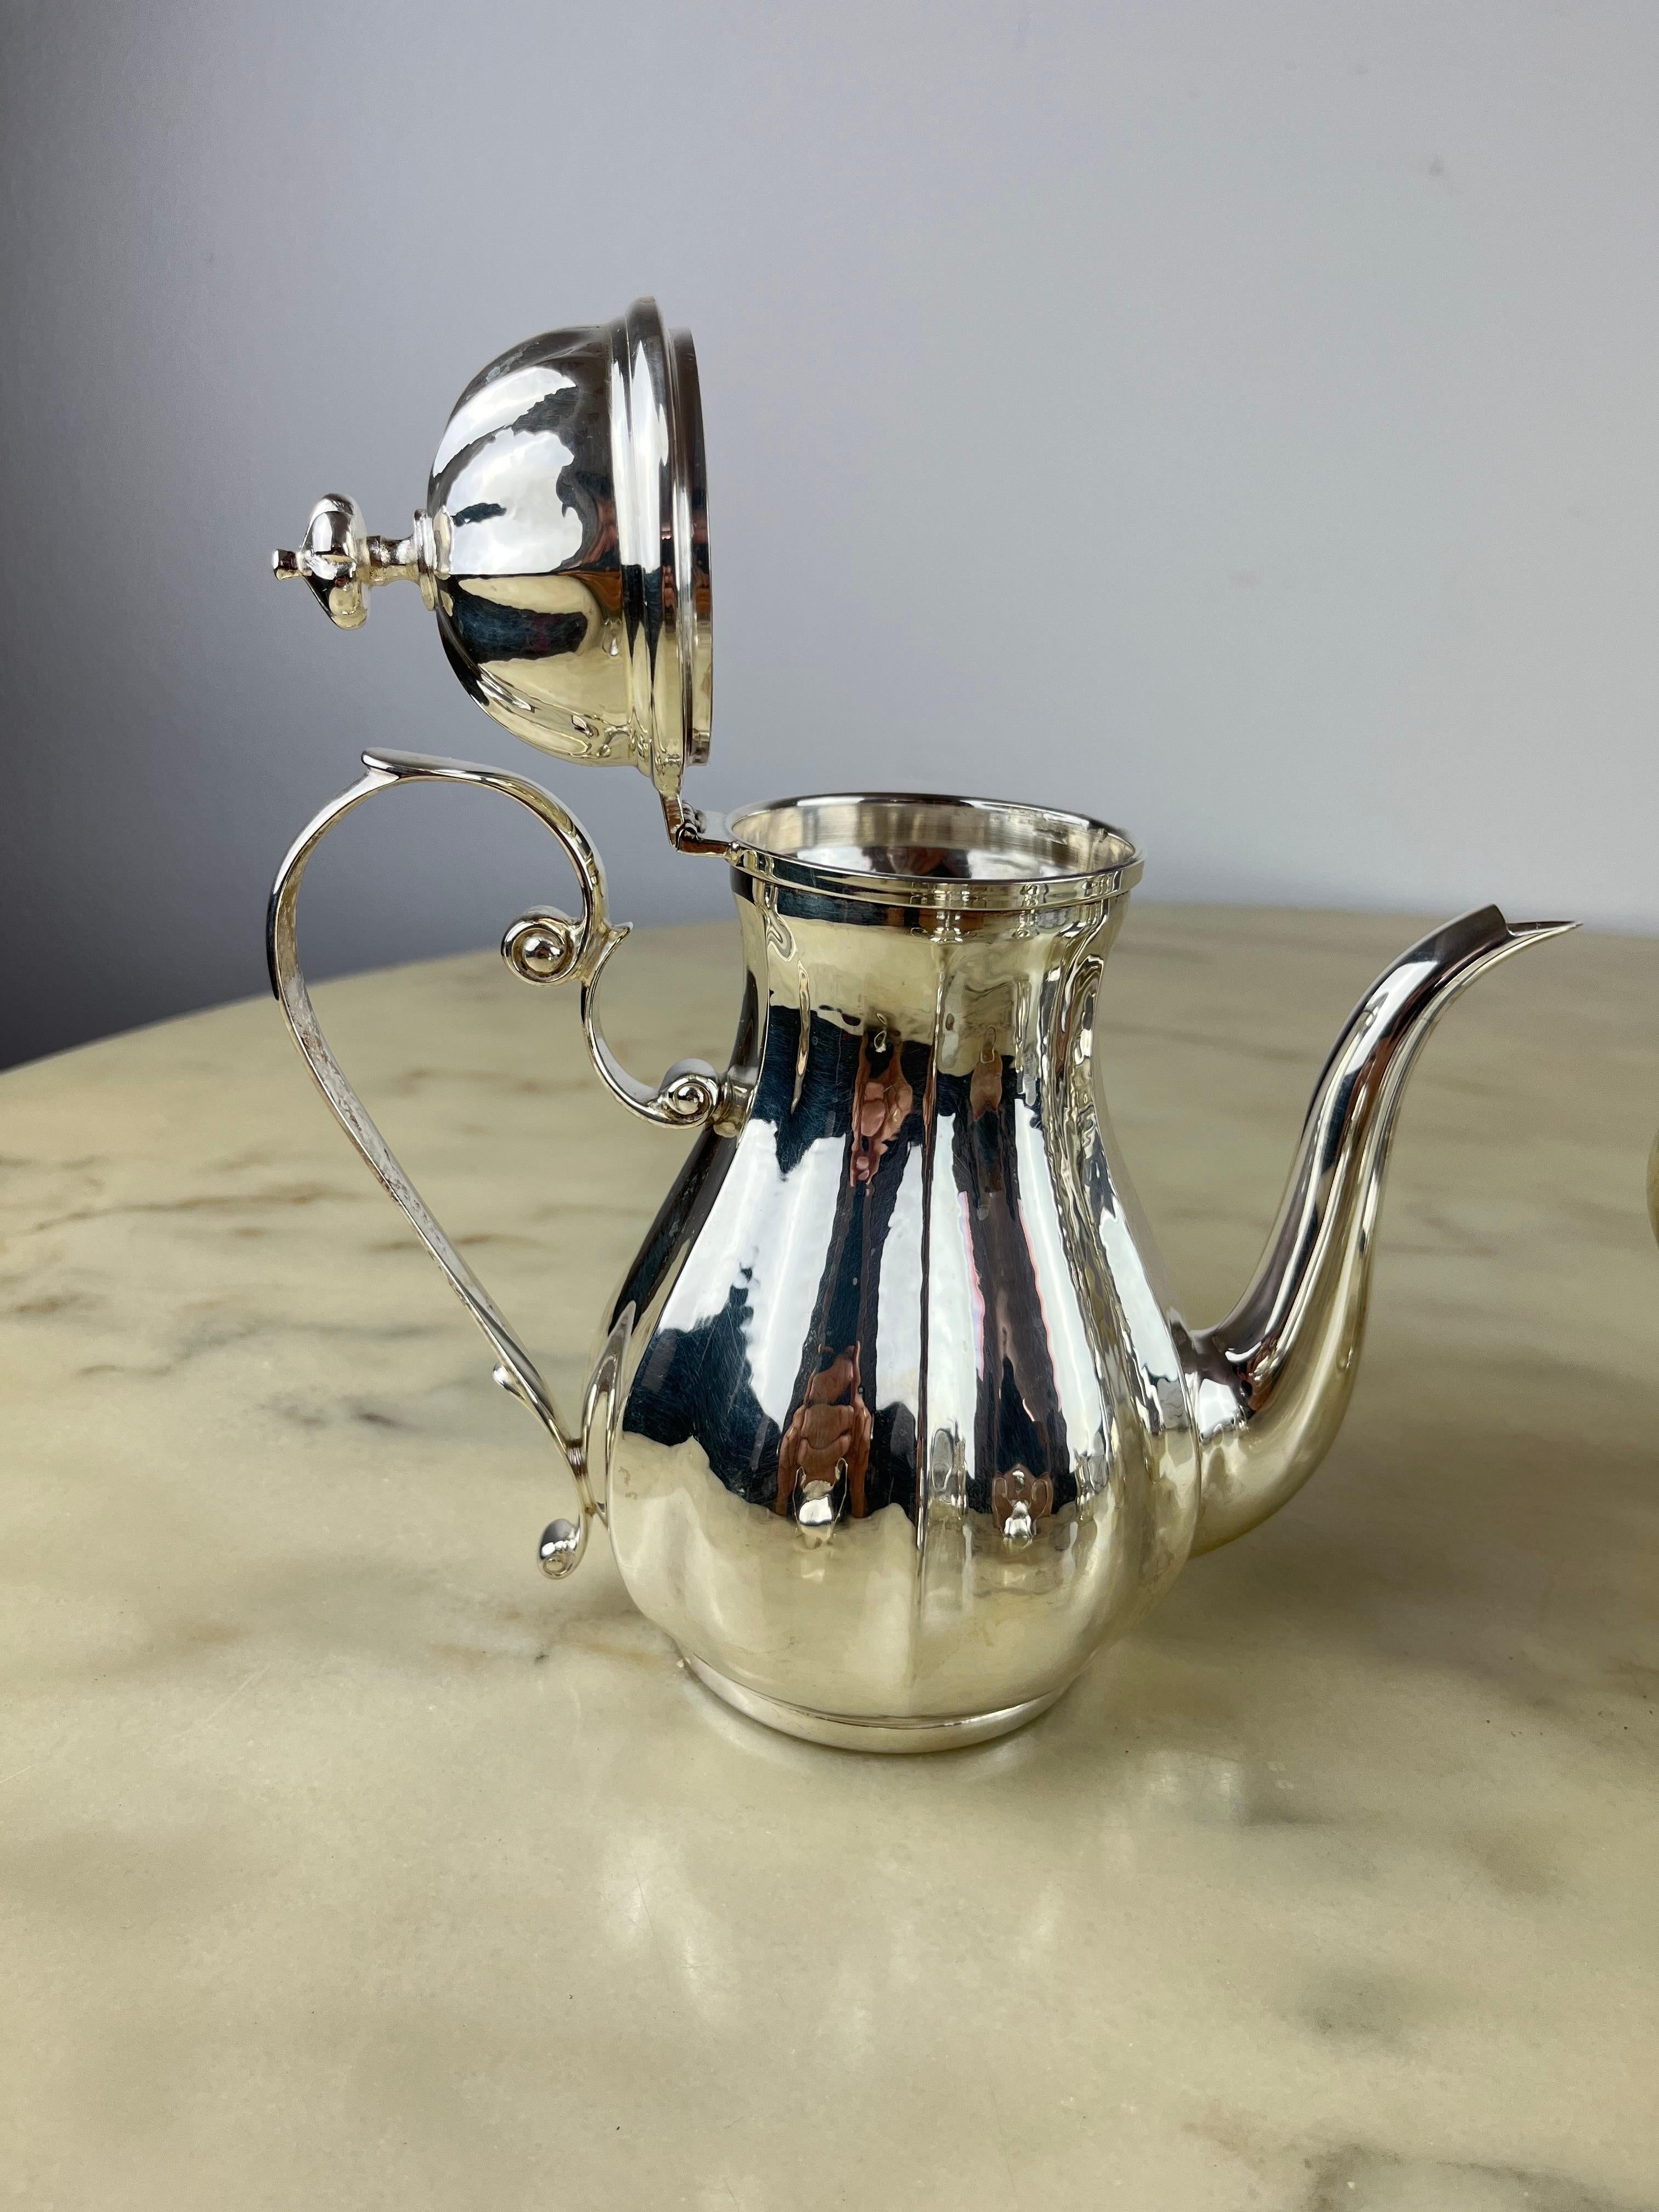 800 silver tea and coffee set 4 pieces
Made in Italy, 80s. Never used. Like New.
Total weight kg. 1.3
The teapot is 20 cm high, the coffee pot 17 cm.
All the pieces are regularly stamped with State marks.
Teapot cm 20 x cm 21 x cm 11 ;
Coffee pot 